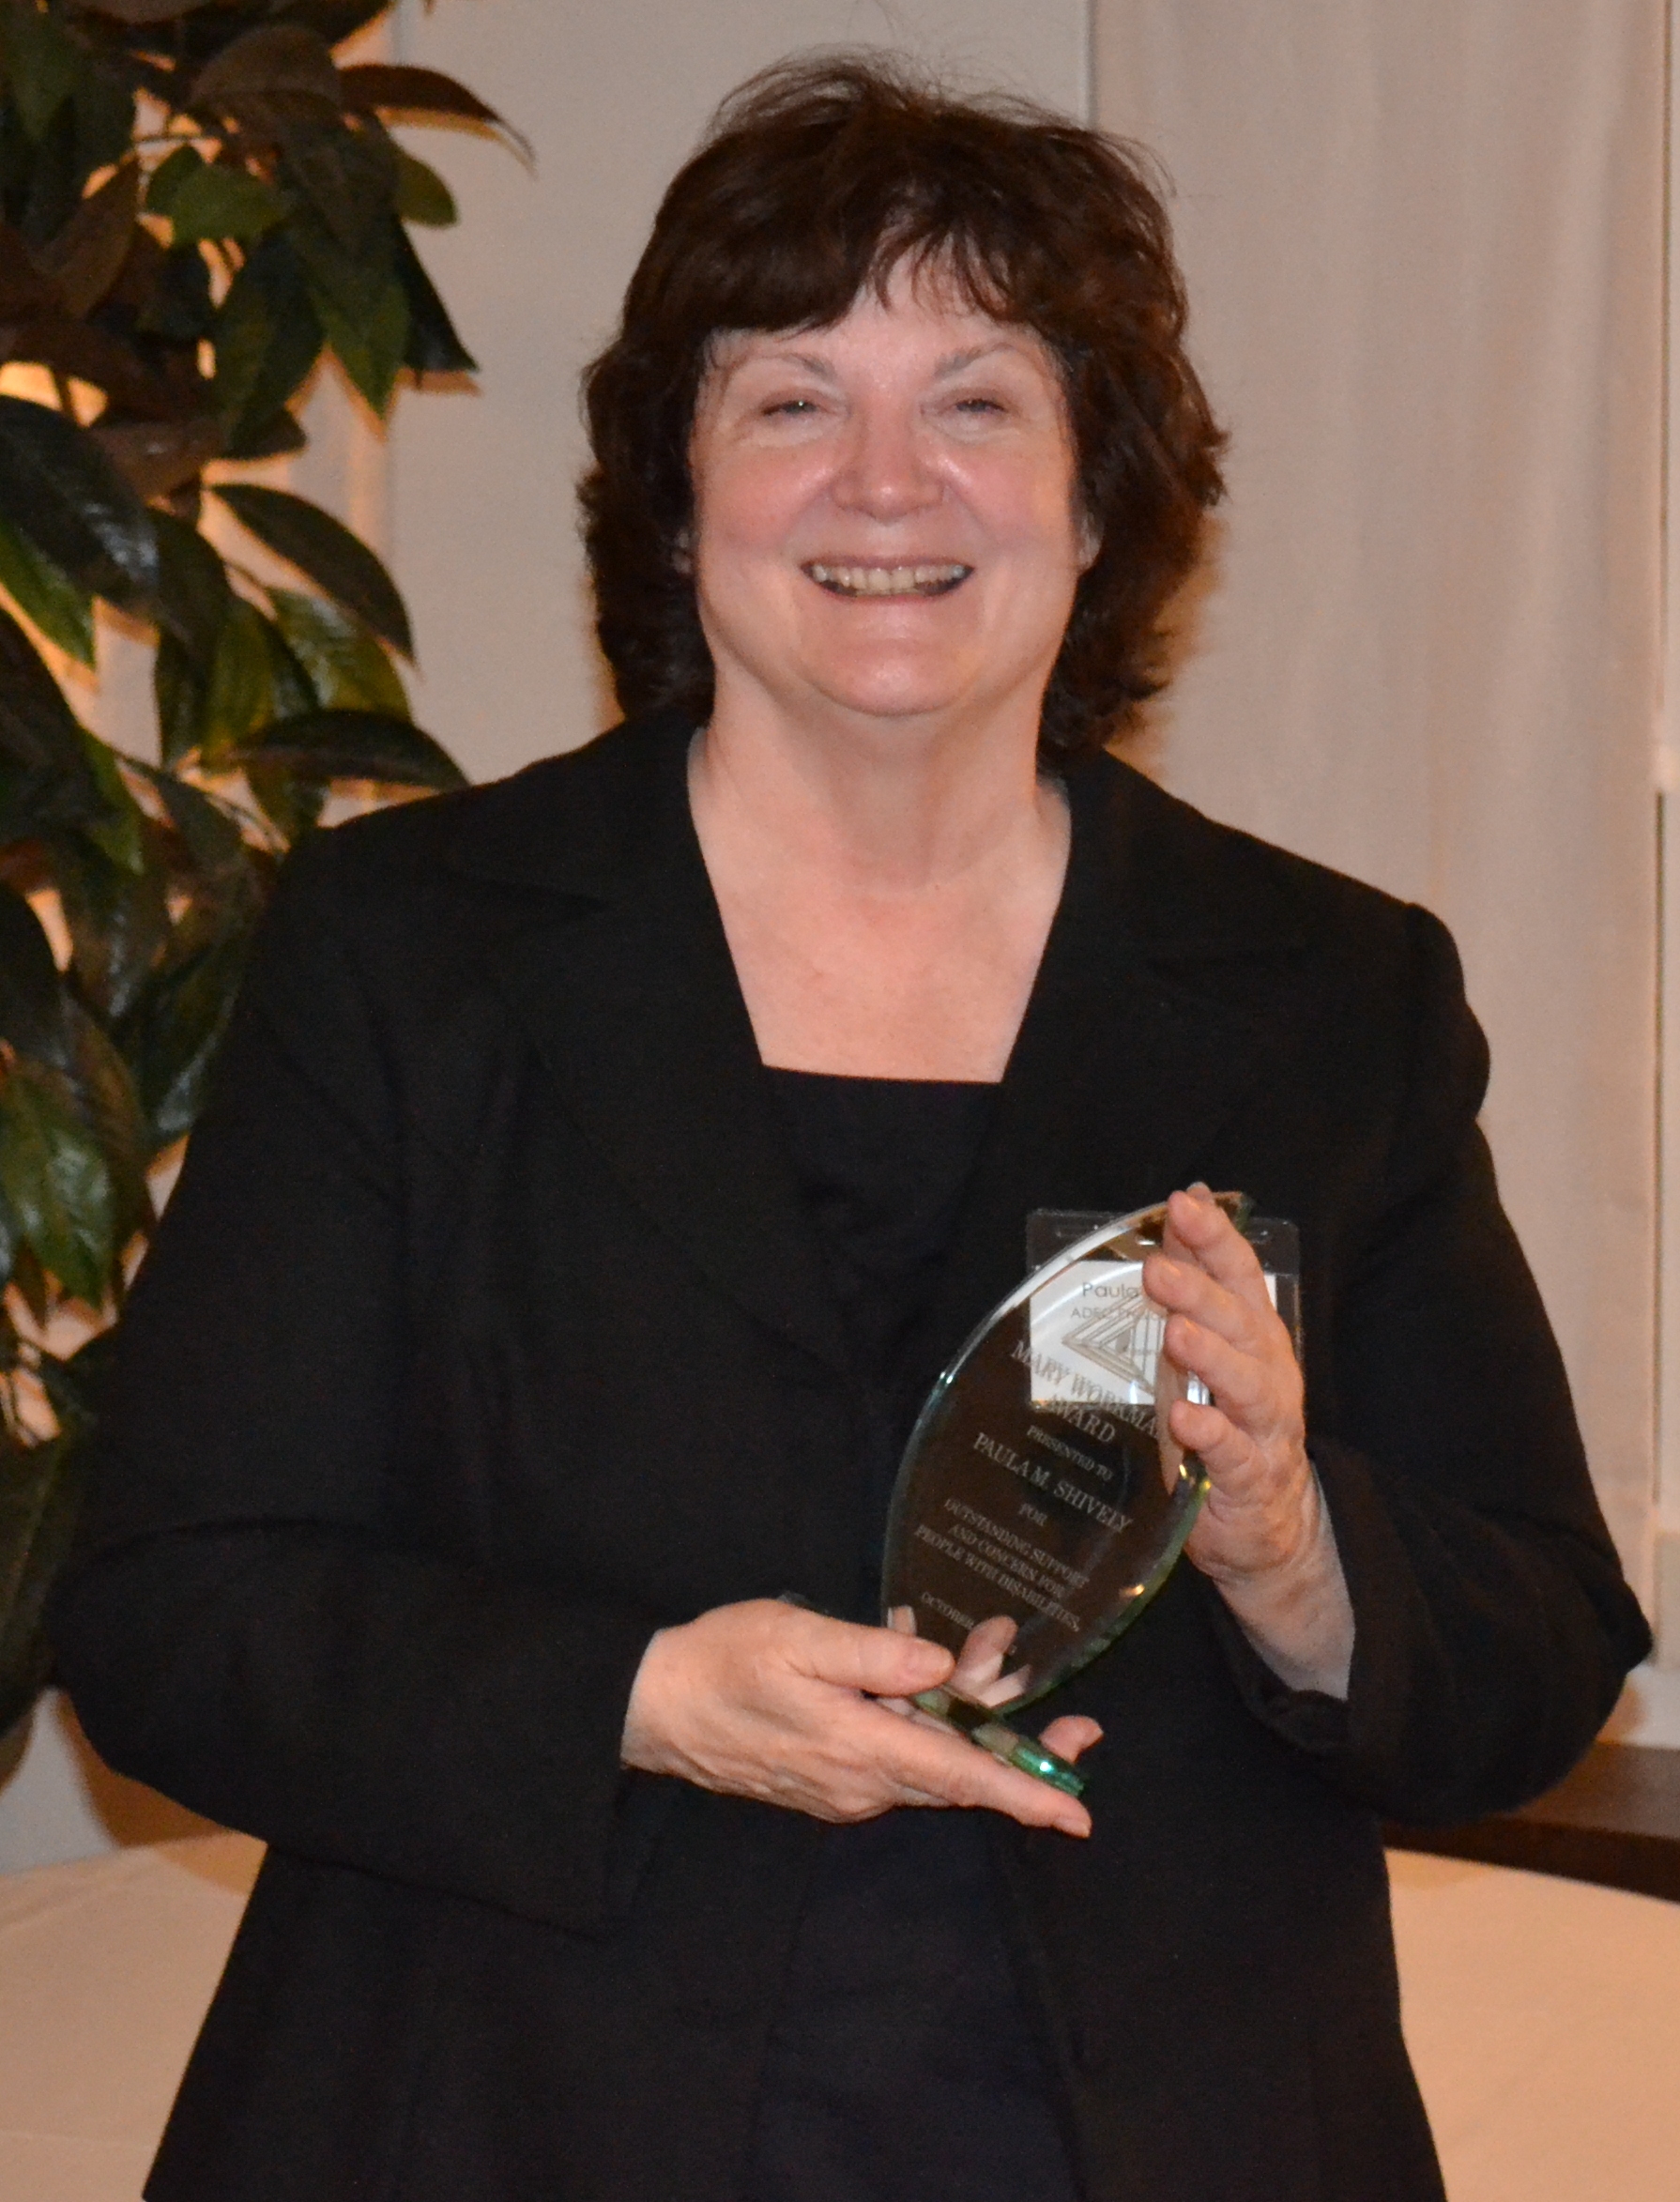 Paula Shively holds The Mary Workman Award, ADEC's highest honor, presented to her Oct. 28, 2013.